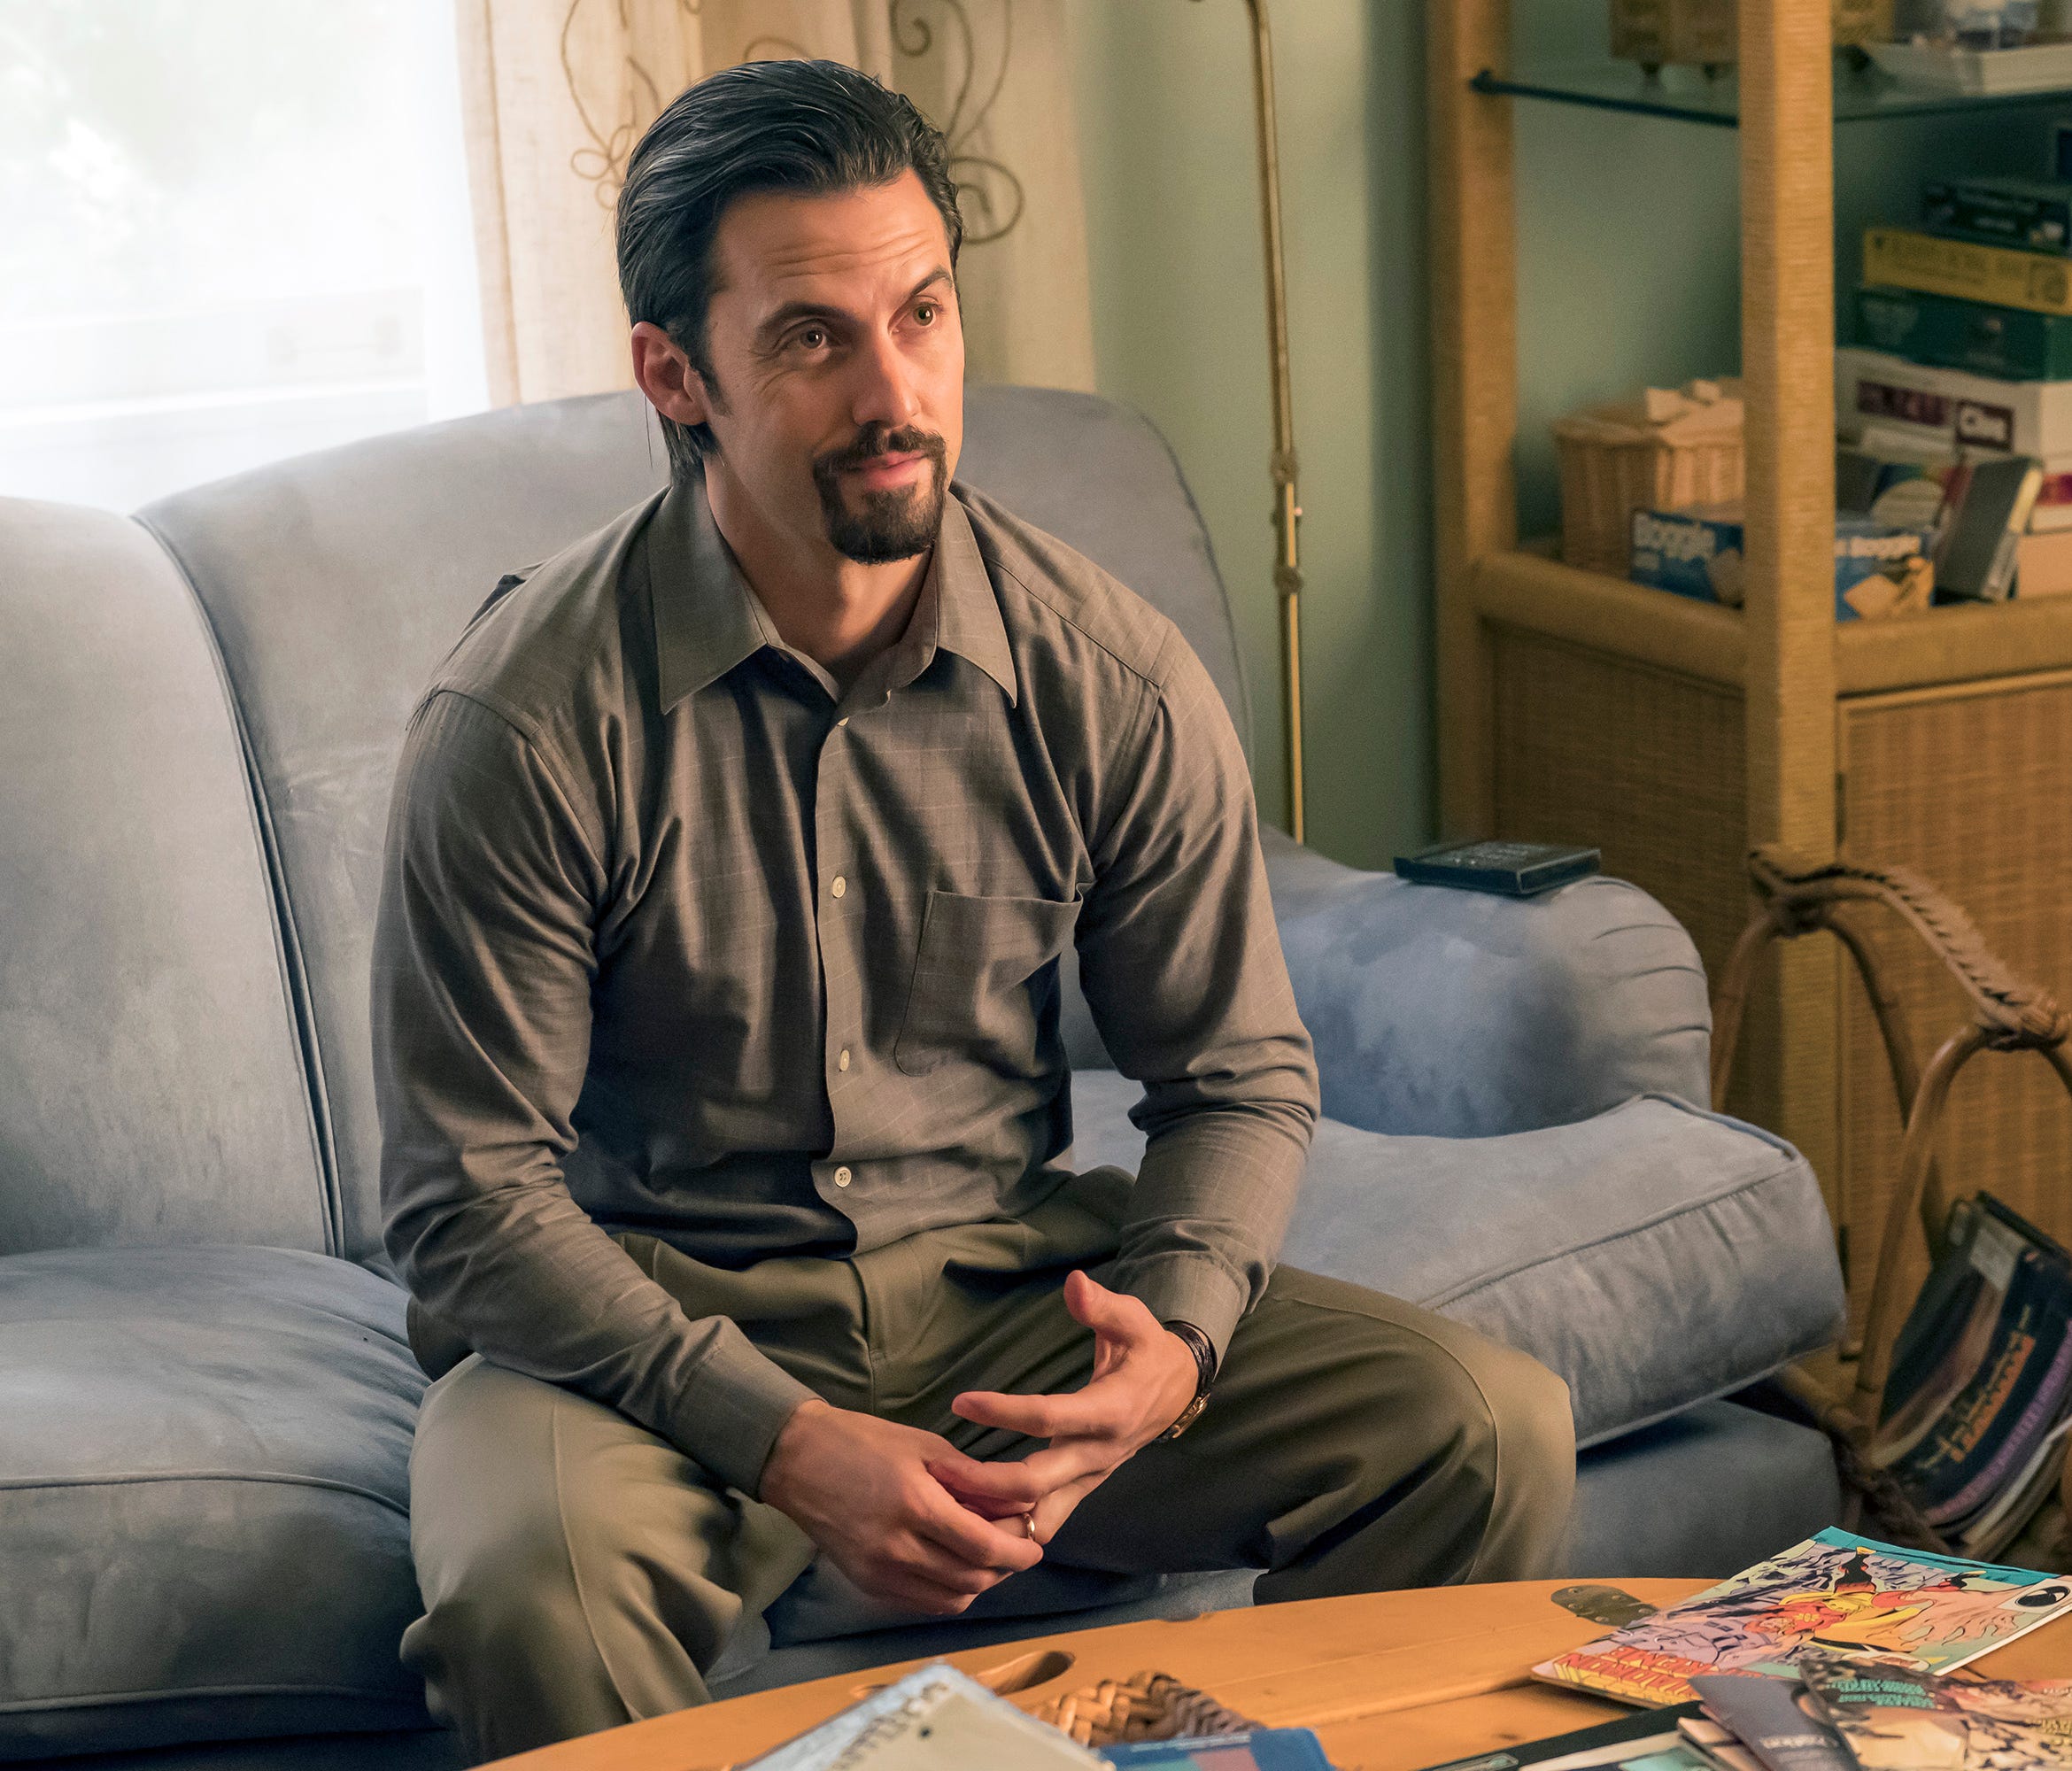 Viewers learned the sad details of how Jack Pearson (Milo Ventimiglia) died in Sunday's post-Super Bowl episode of NBC's 'This Is Us.'